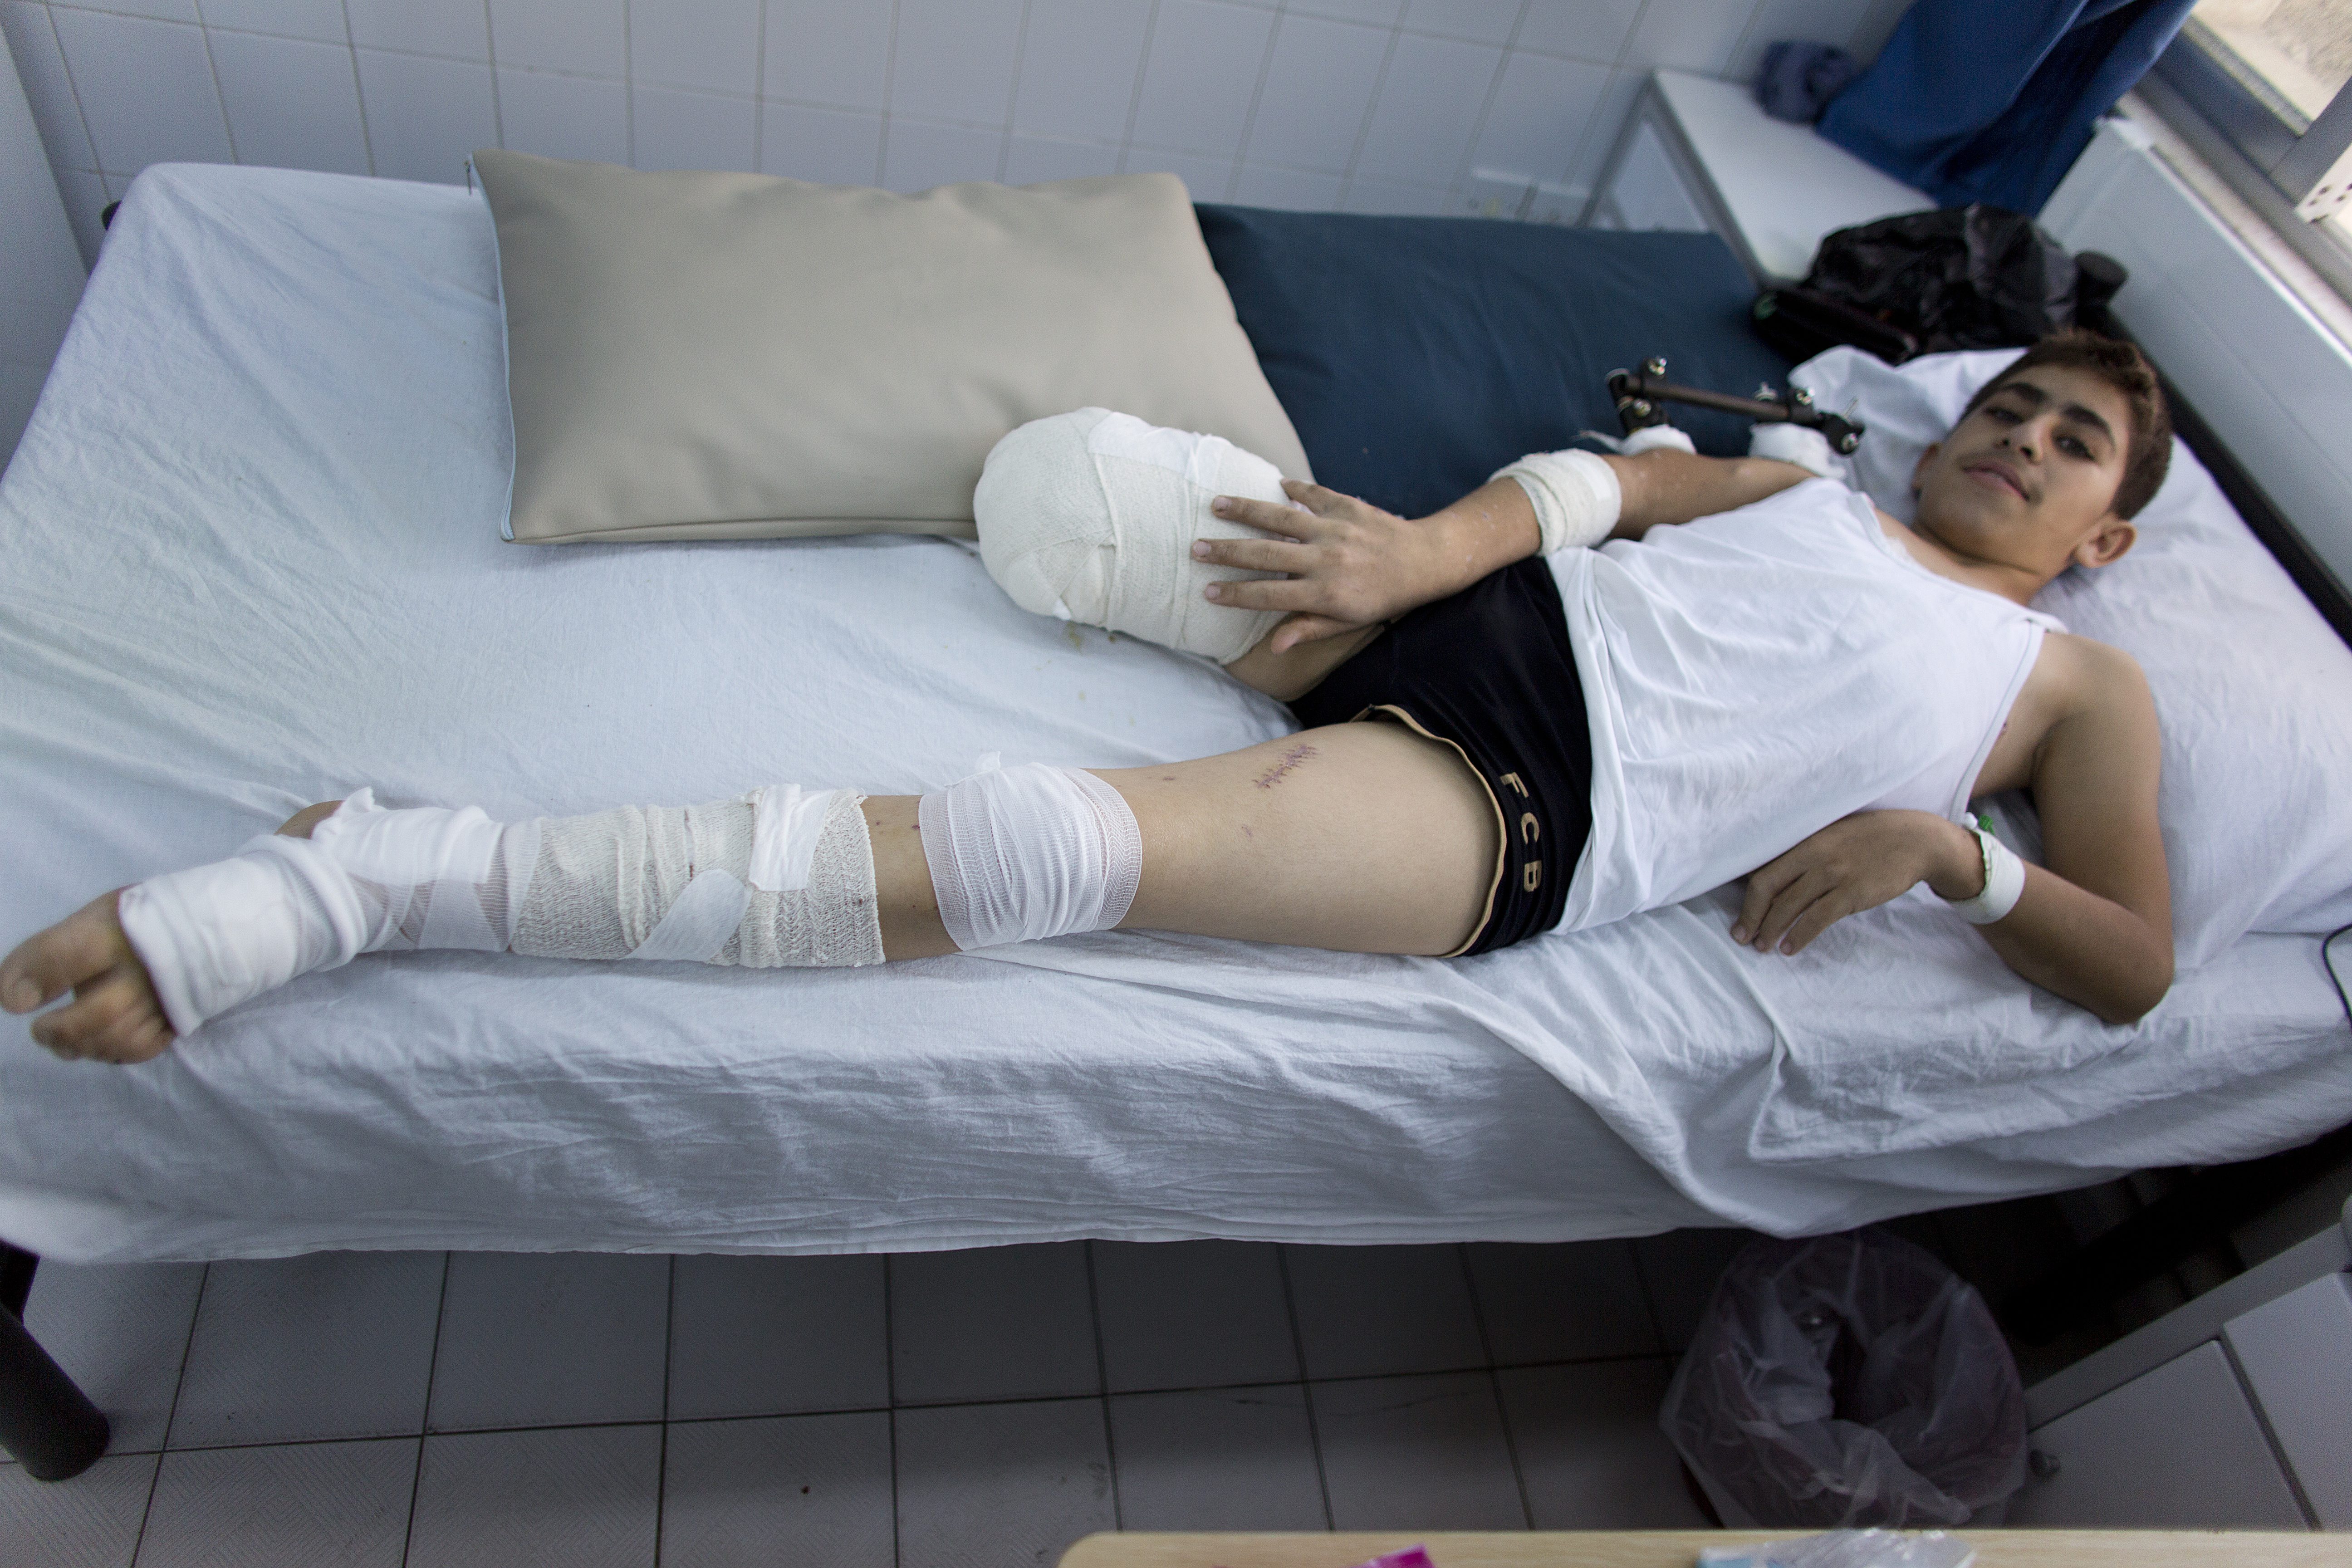 Marked for a lifetime : Syrian refugee in a hospital run by Medecins sans Frontieres in Jordan.